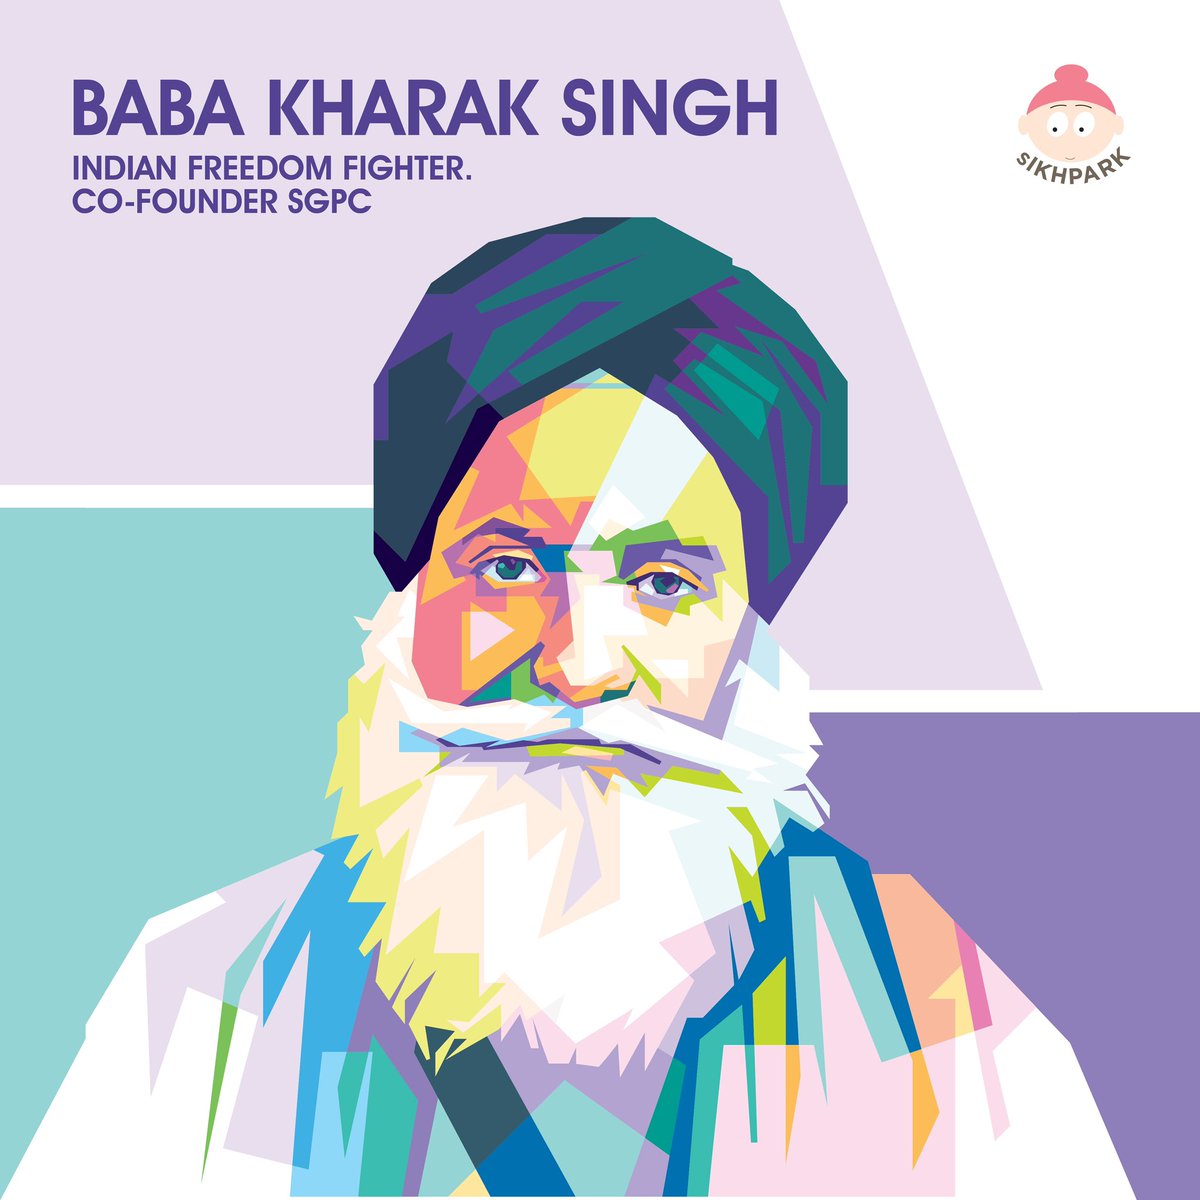 My series on Sikh #indianfreedomfighter 'In the fight for India's freedom, if you find a bullet in my back, do not count me as one amongst the 'Sikhs of the Gurus' and do not cremate my dead body according to the Sikh rites…” Baba Kharak Singh.

#indianindependence #hero